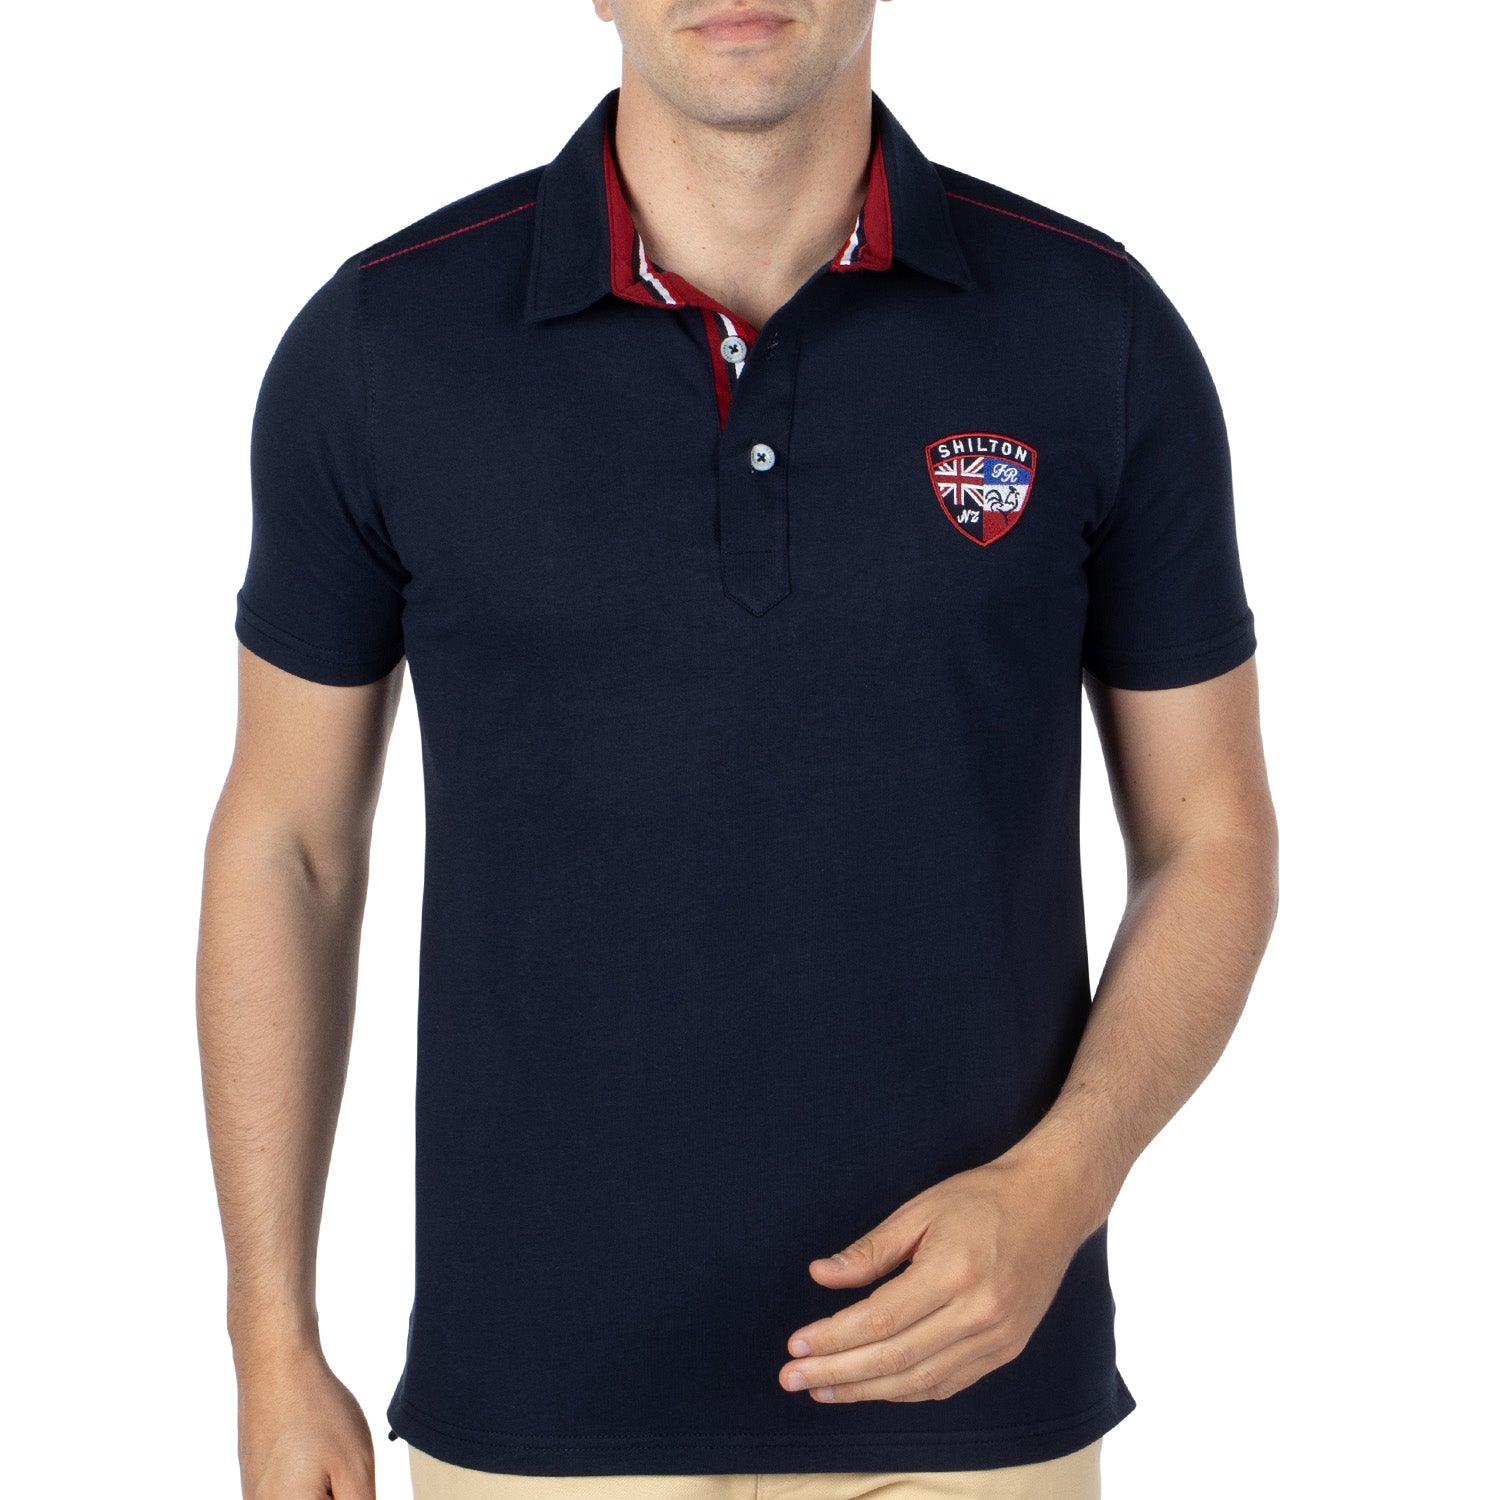 Polo rugby legend Navy - Shilton